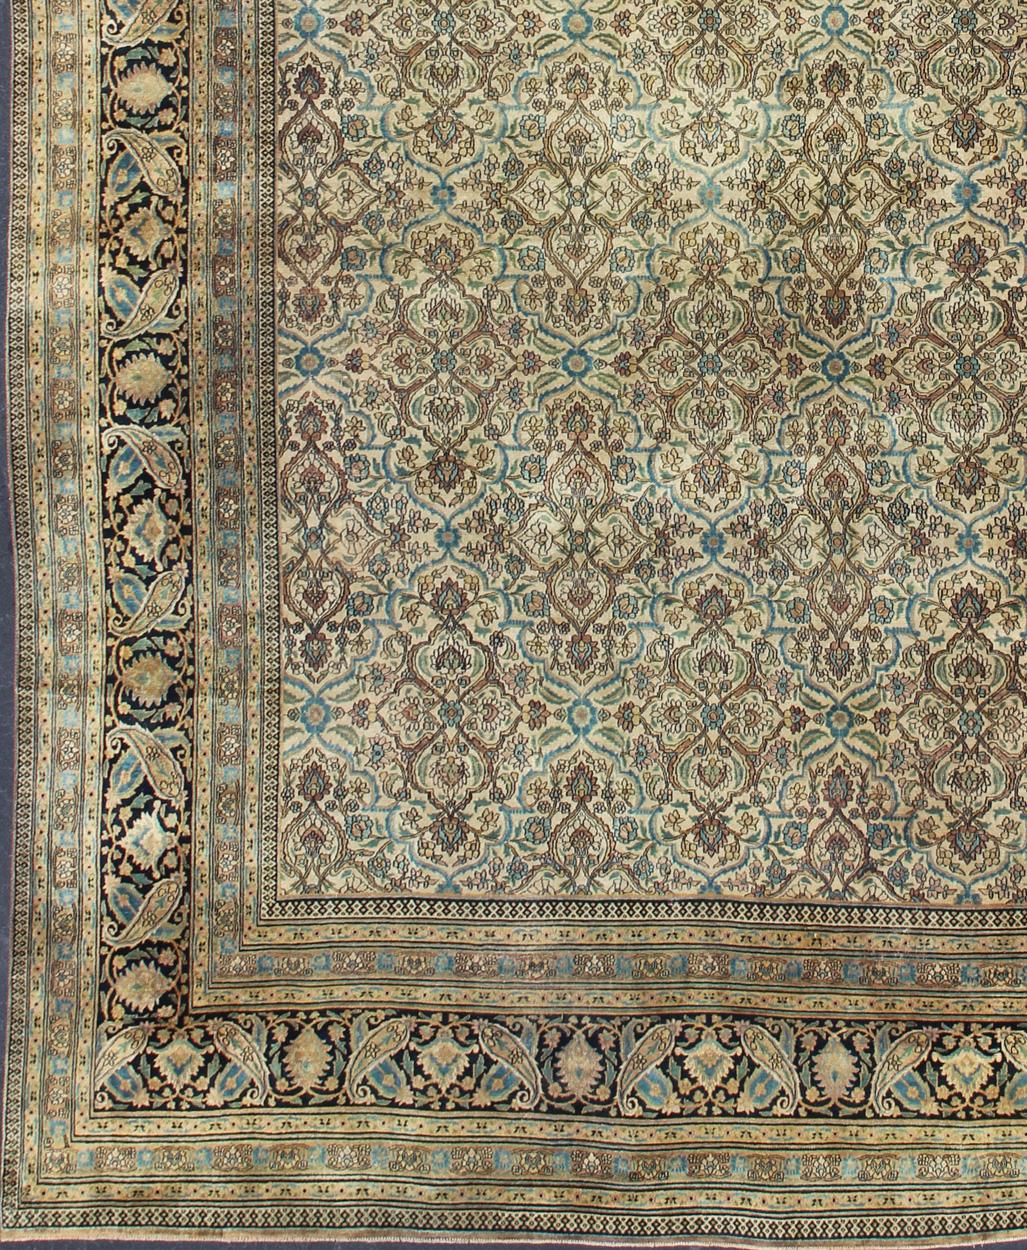 Large Antique Persian Khorassan with All-Over Botanical Design in Earth Tones. Sub geometric design Khorassan antique rug from Persia in natural color Palette, rug 19-0213, country of origin / type: Iran / Khorassan, circa 1900

Measures: 13'6 x